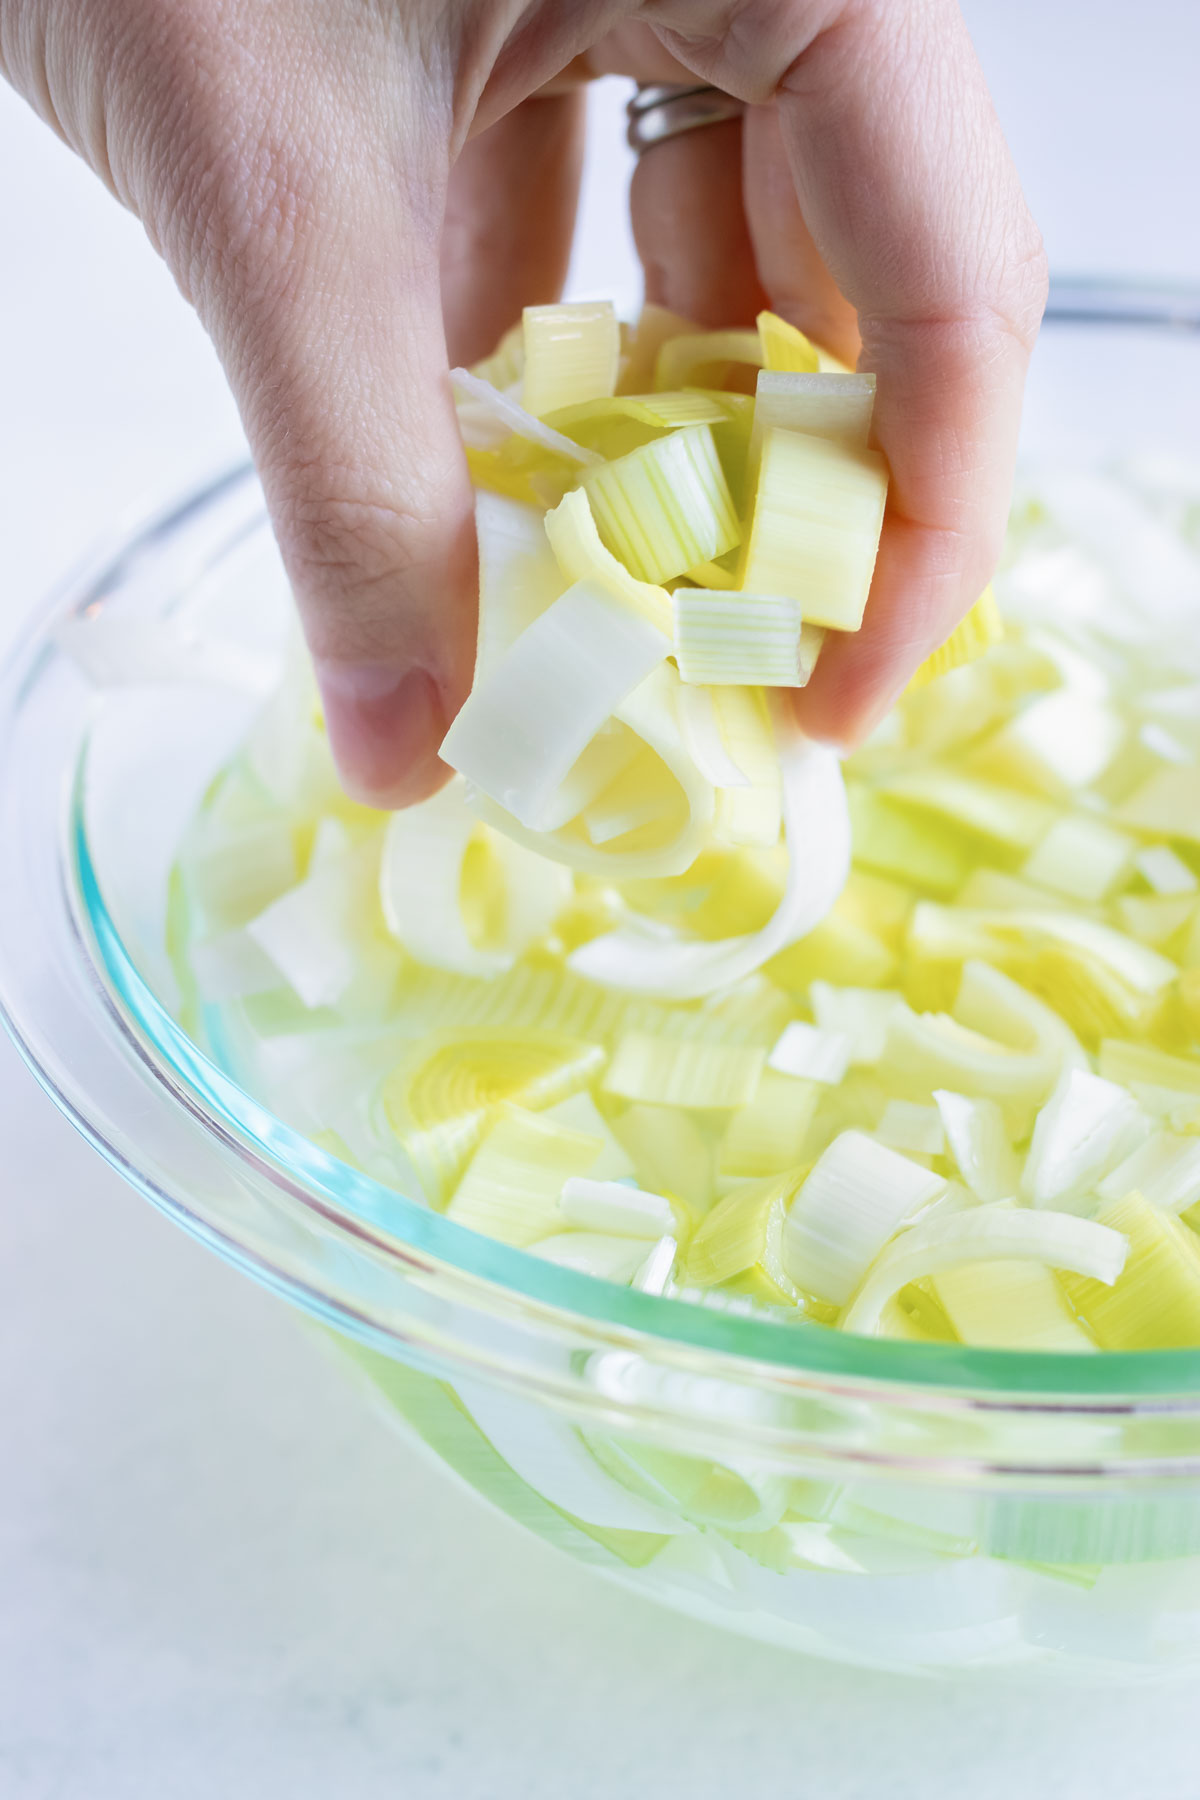 A hand picking up sliced leeks out of a bowl of water.